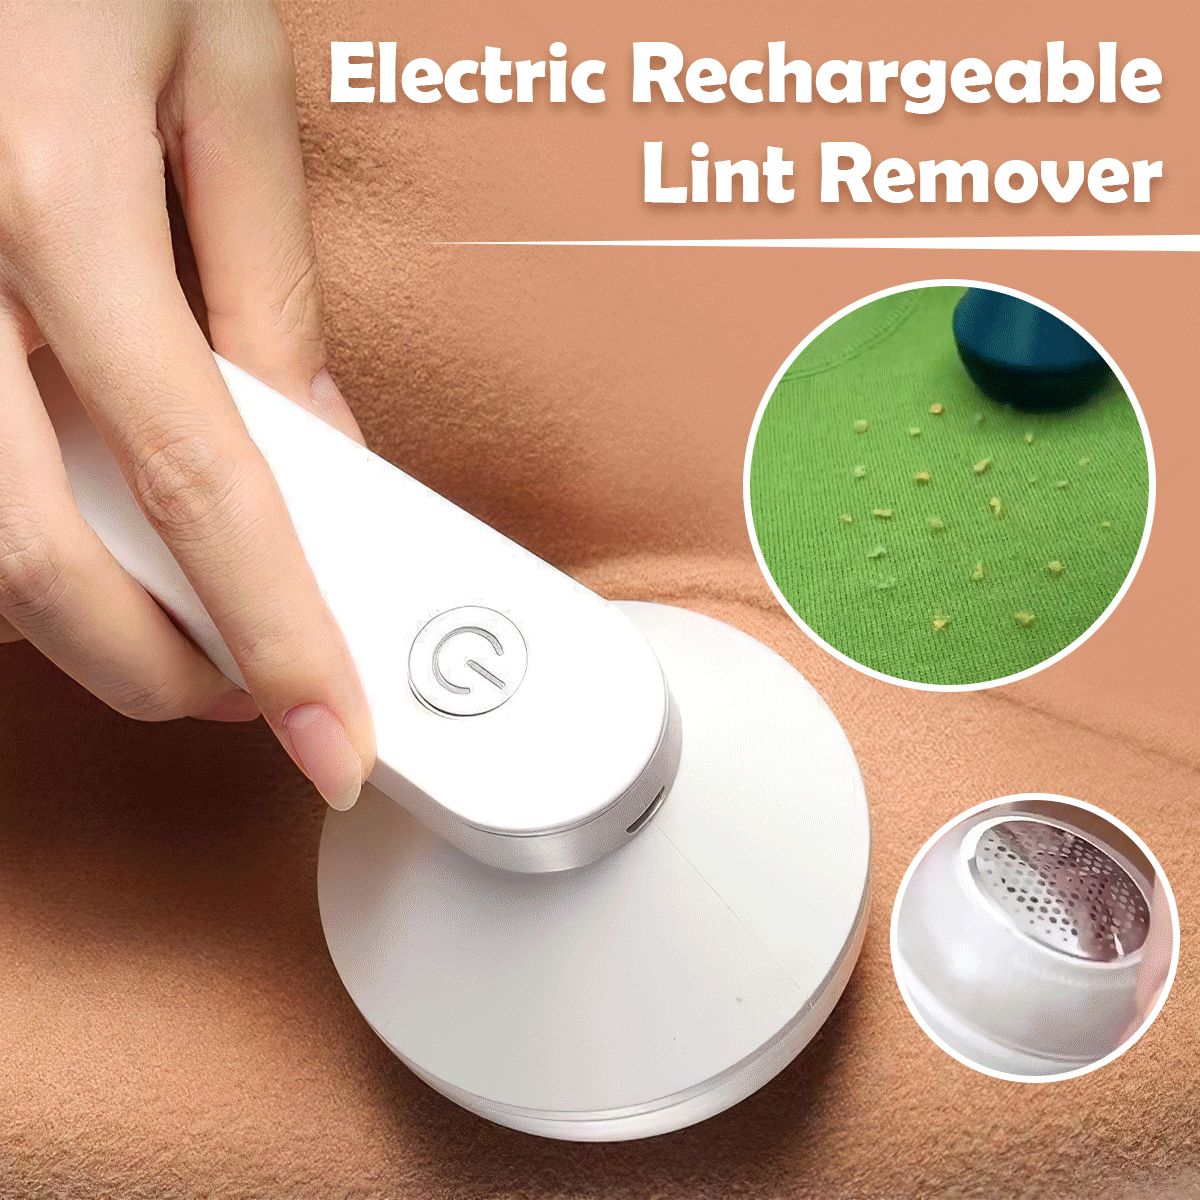 THIS IS A DISCOUNT FOR YOU - Electric Rechargeable Lint Remover